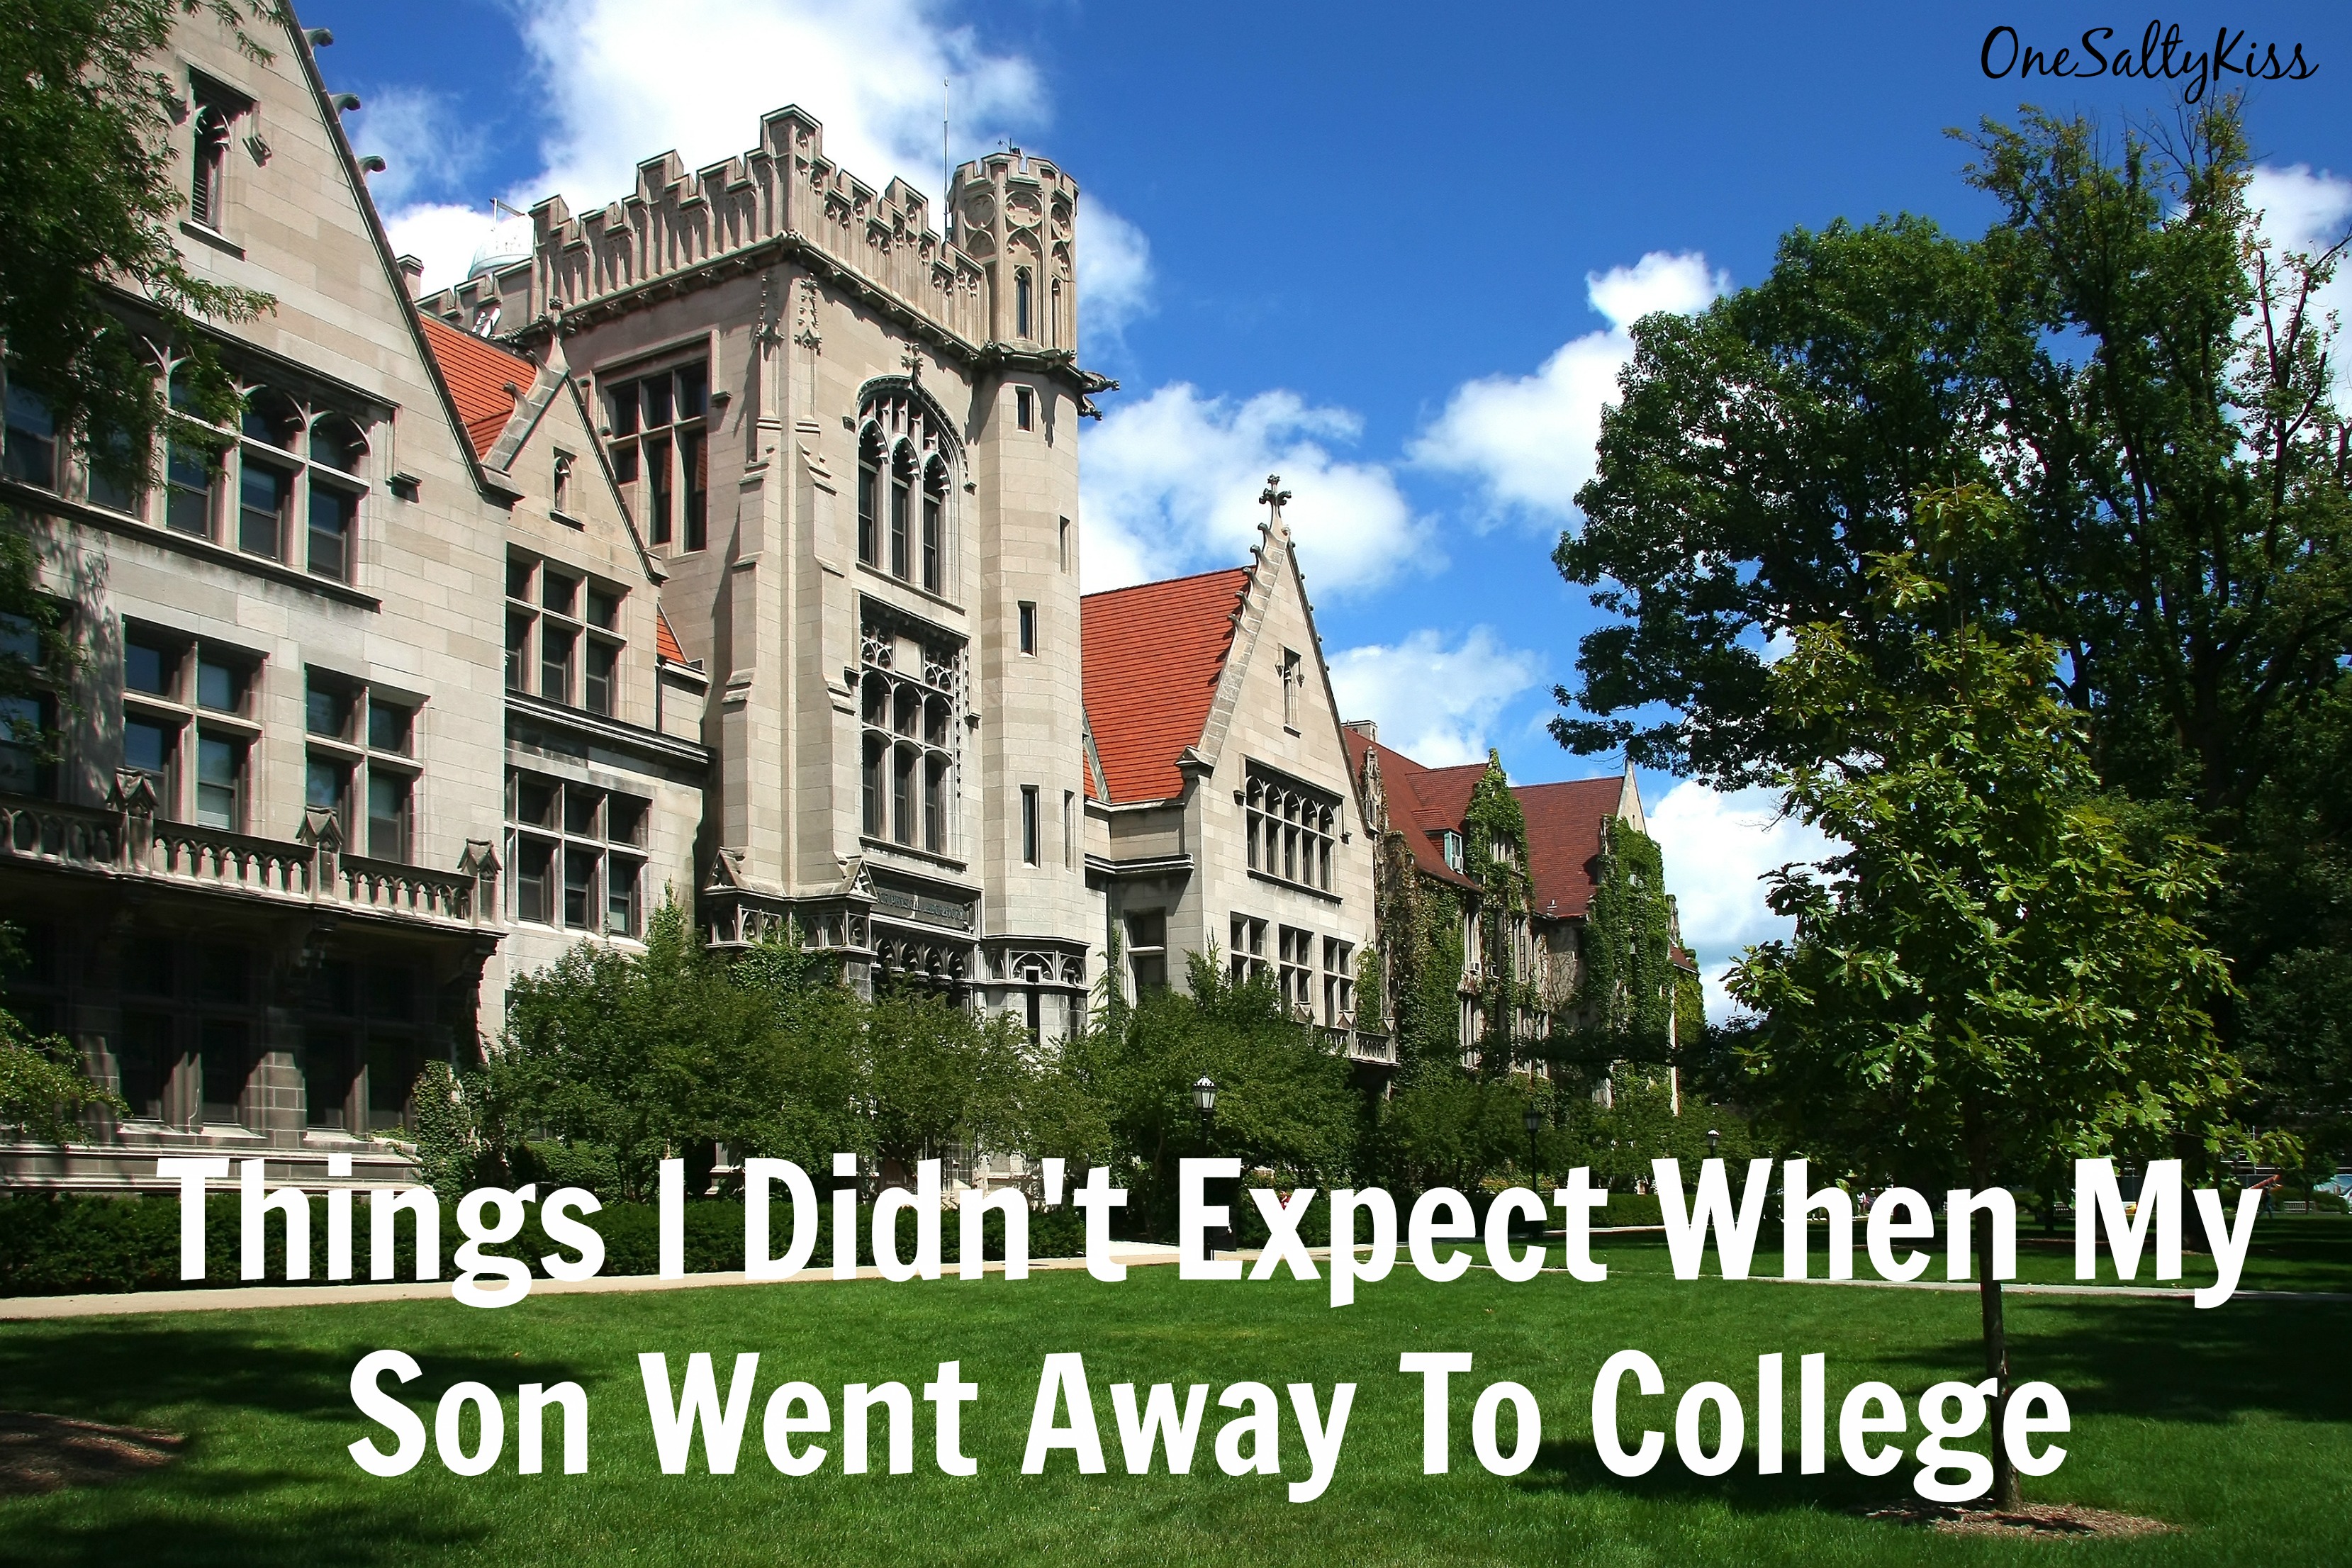 Things I Didn’t Expect When My Son Went Away To College